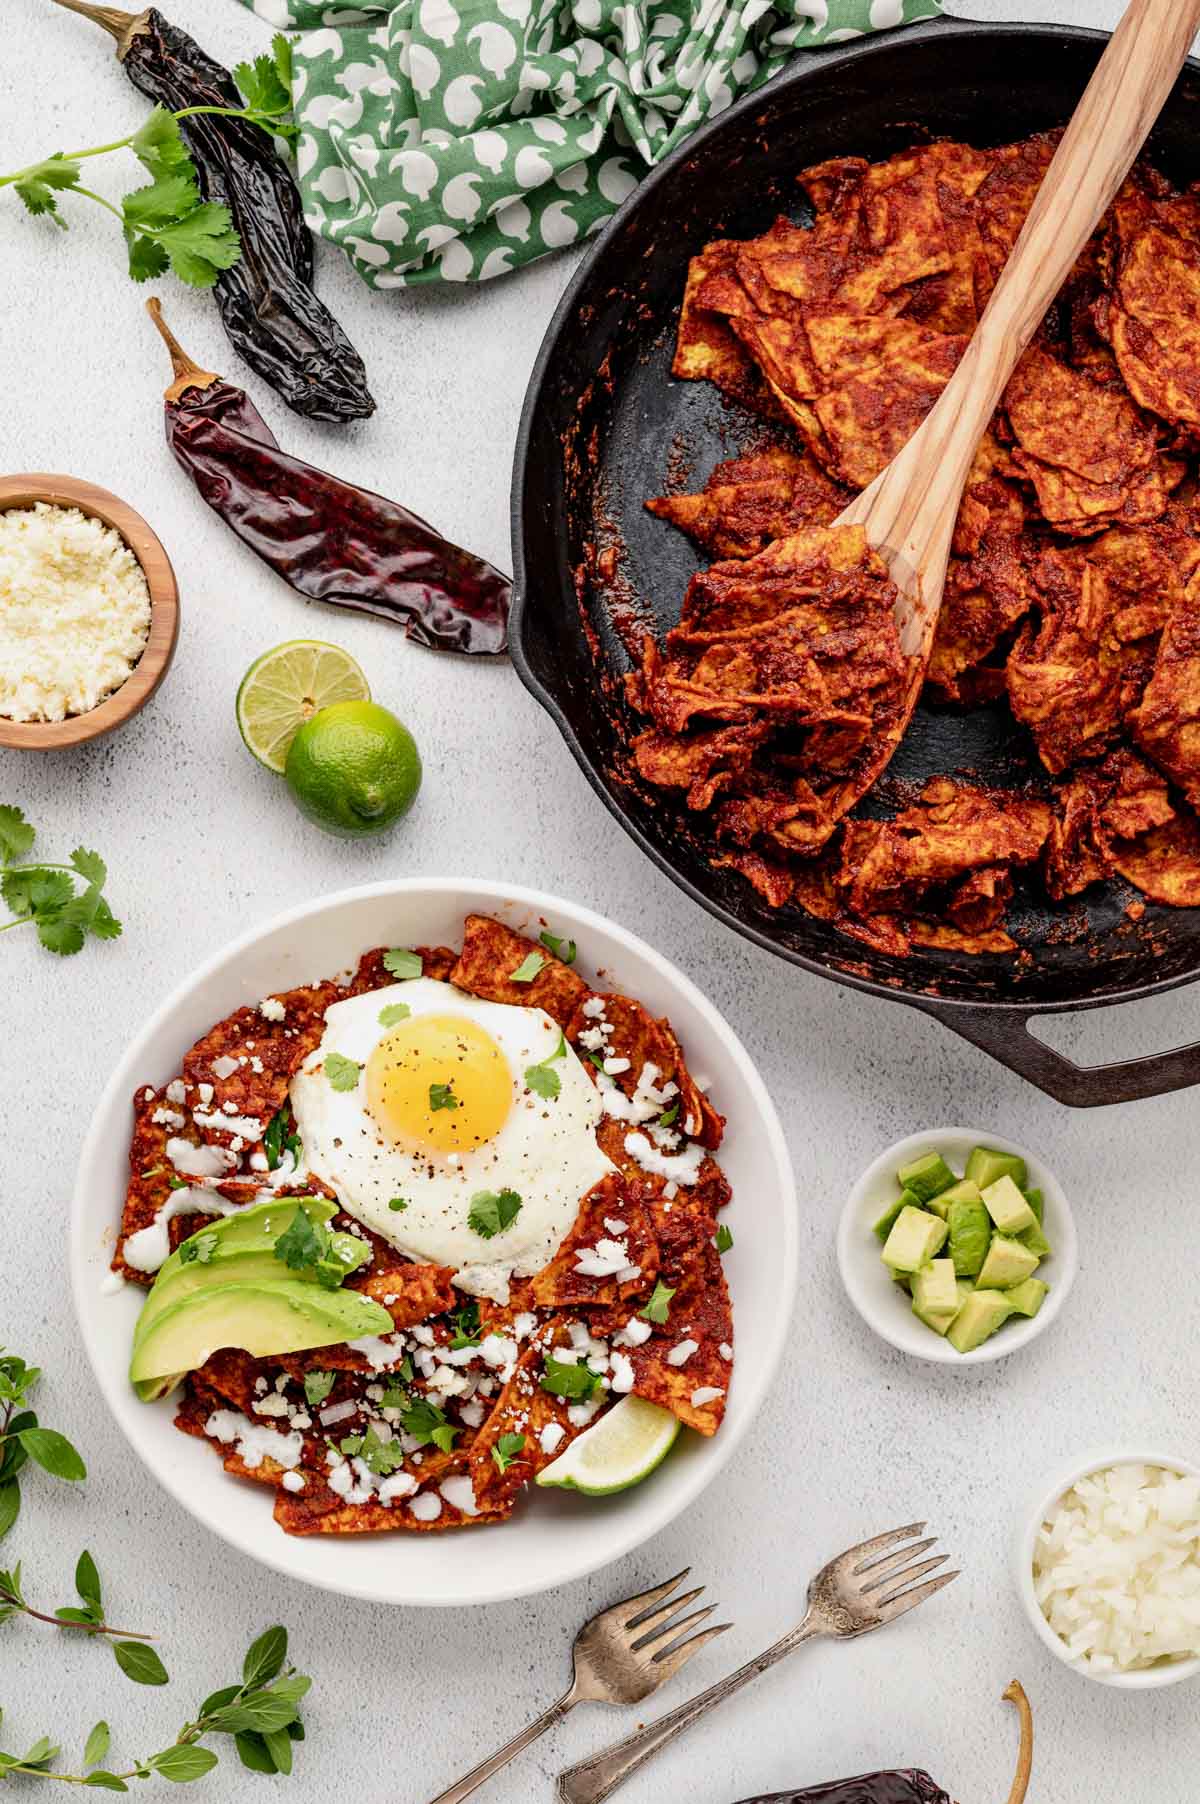 Chilaquiles rojas tortillas in a skillet with some in a bowl topped with avocado and eggs.